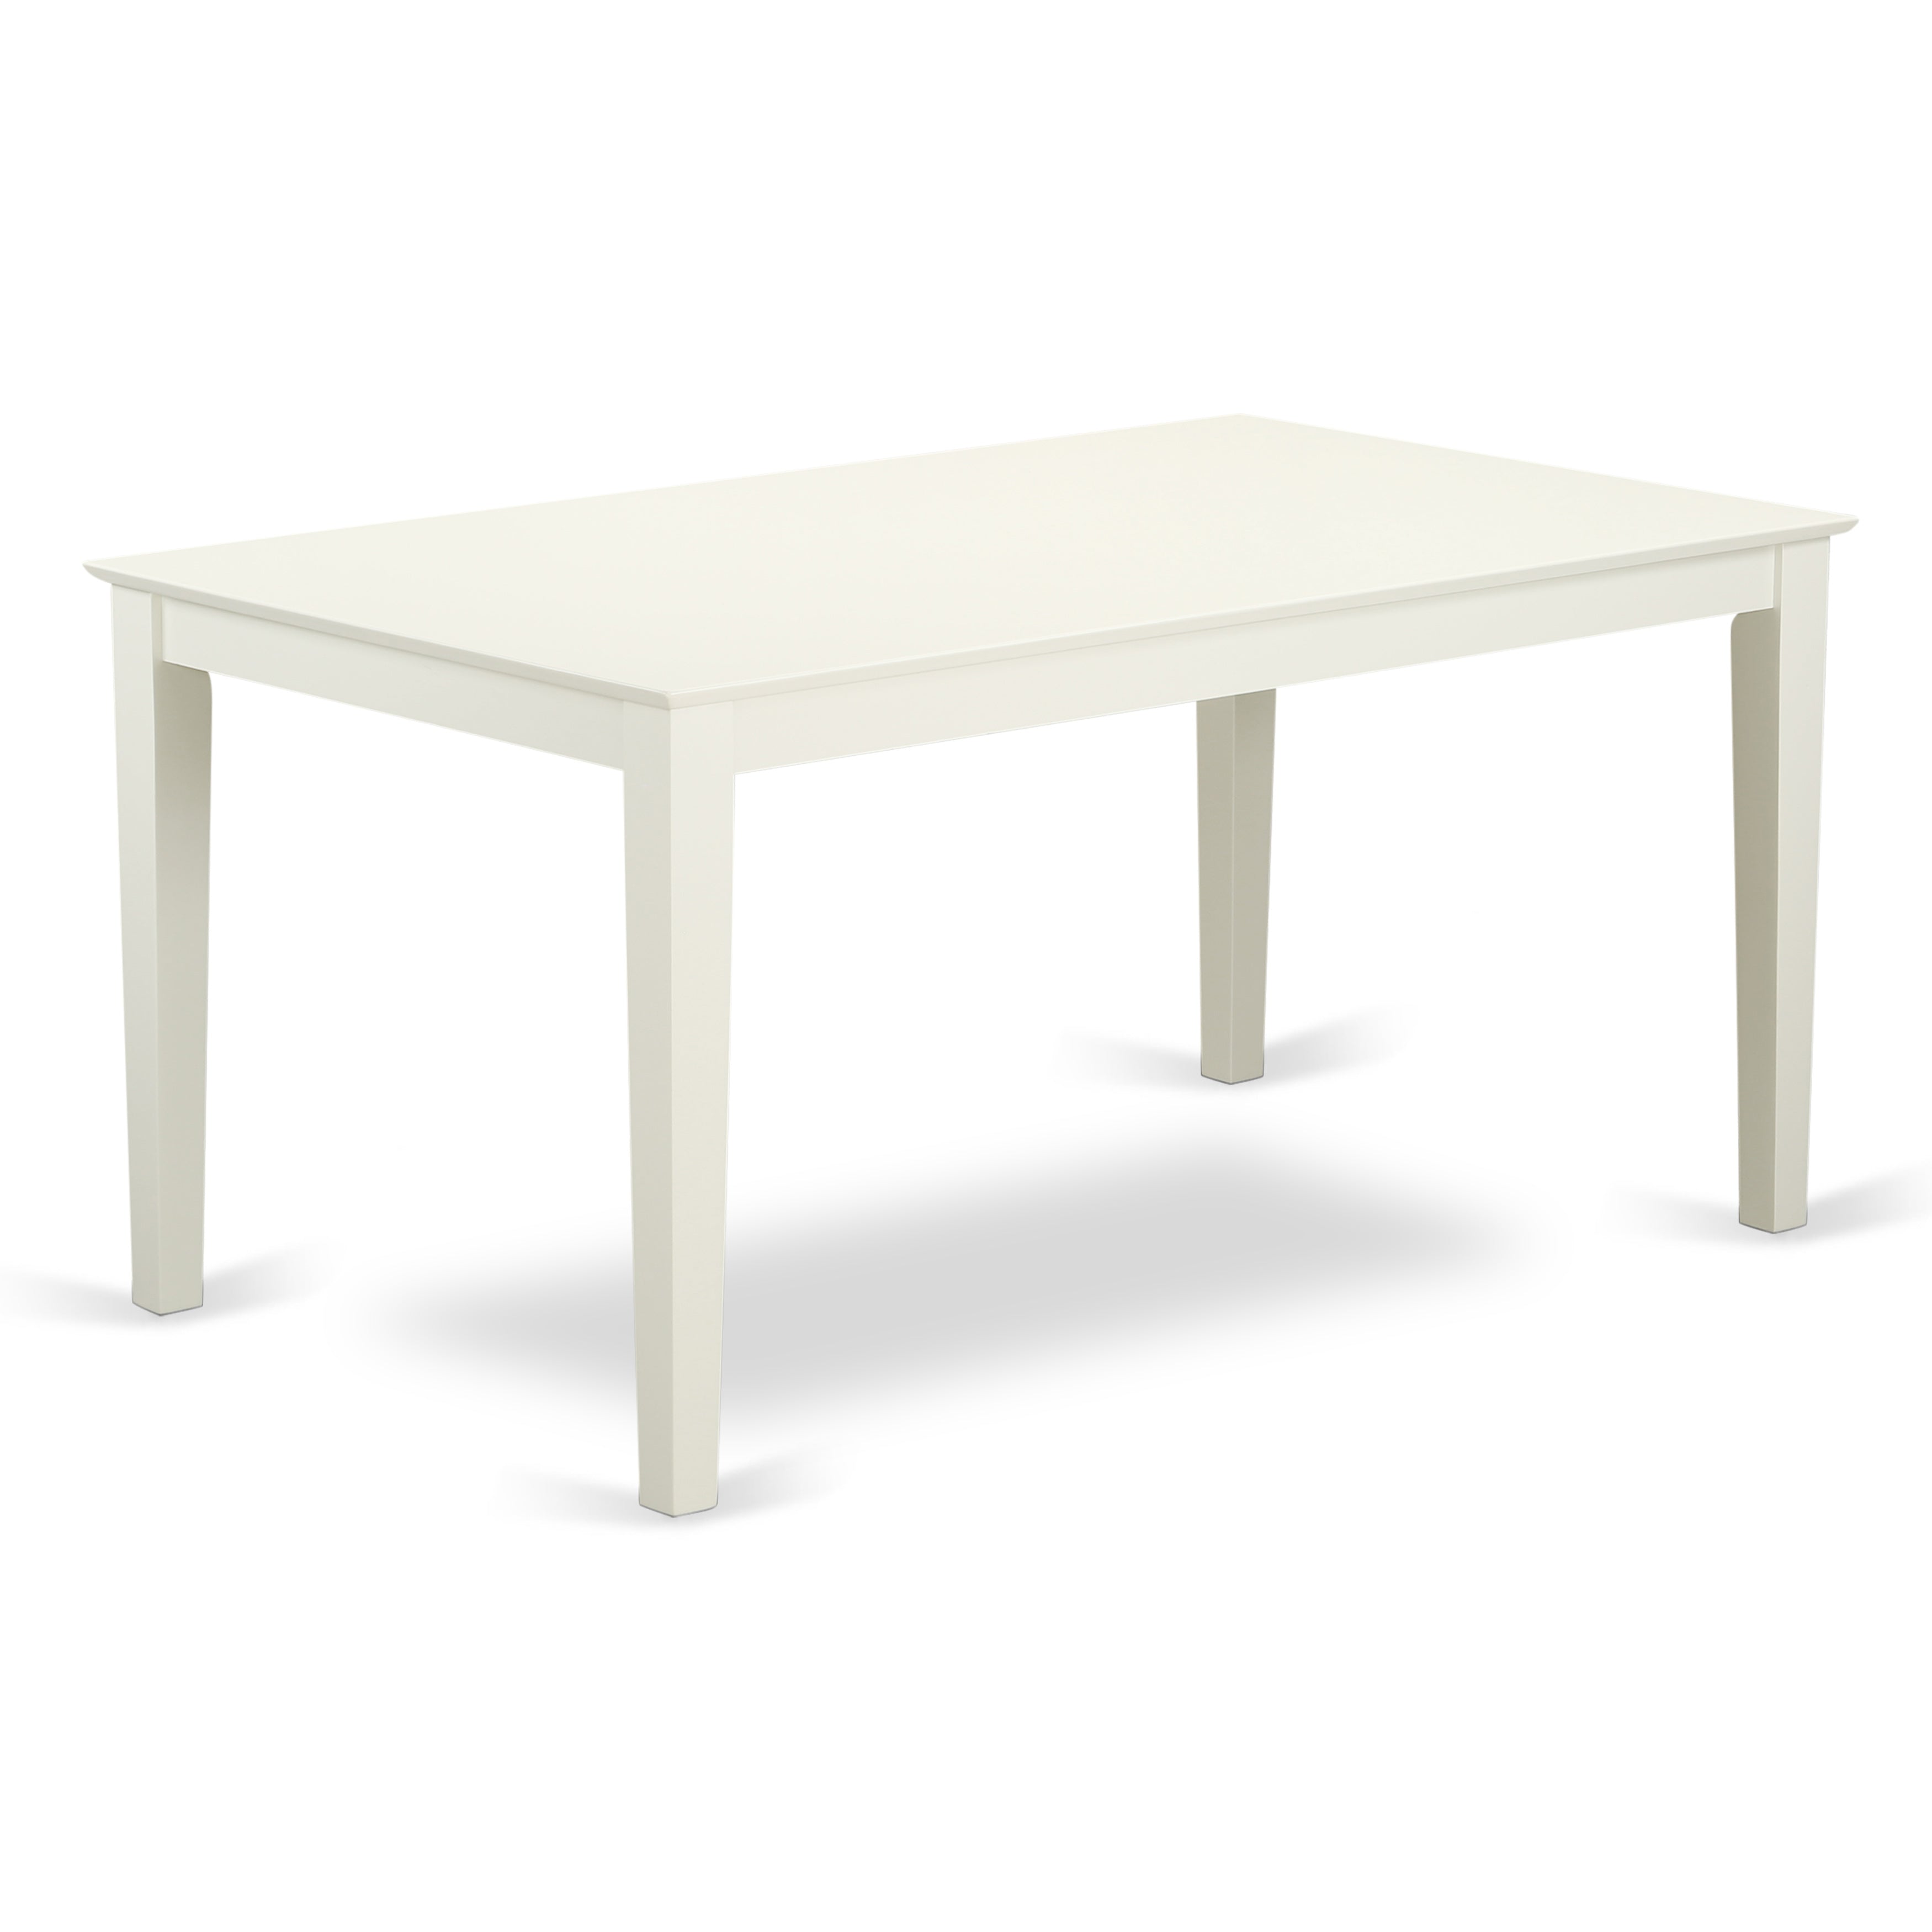 CAEN7-LWH-57 7Pc Rectangle 60" Dining Table And 6 Parson Chair With Linen White Leg And Pu Leather Color Pond